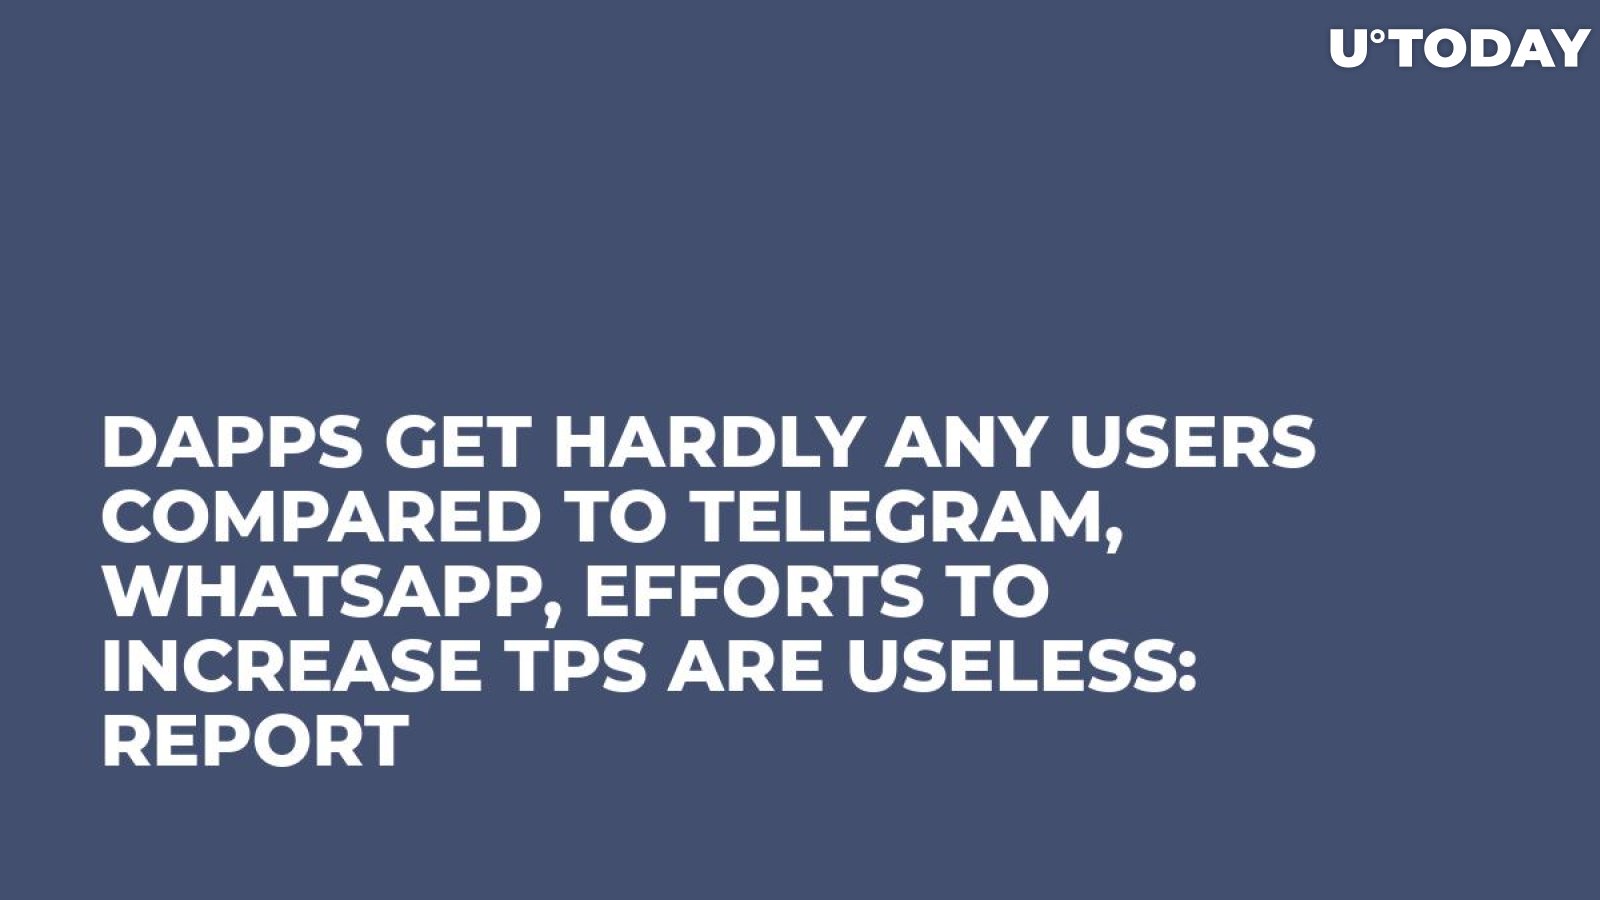 DApps Get Hardly Any Users Compared to Telegram, WhatsApp, Efforts to Increase TPS Are Useless: Report